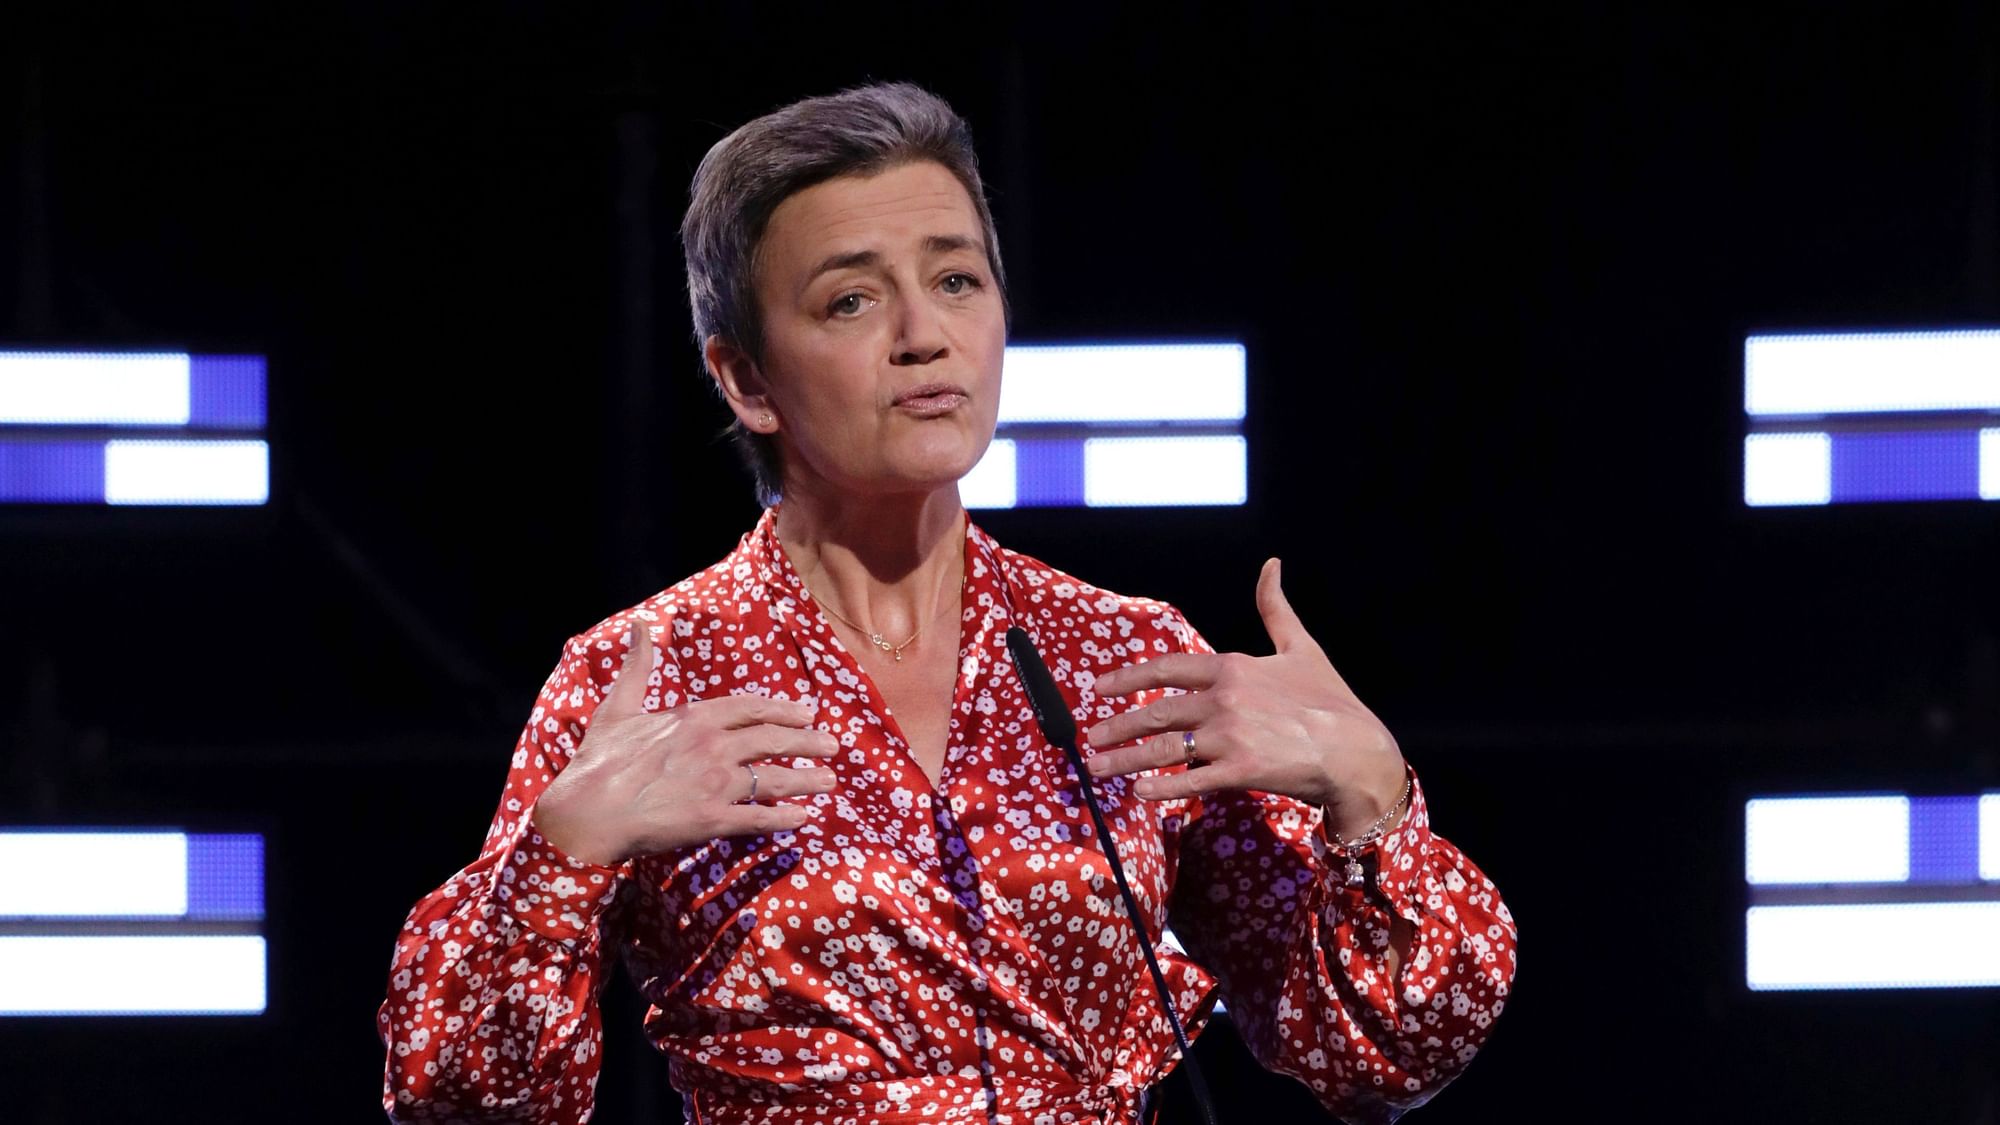 Candidate to the presidency of the European Commission, Denmark’s Margrethe Vestager, steps onto the stage at the European Parliament.